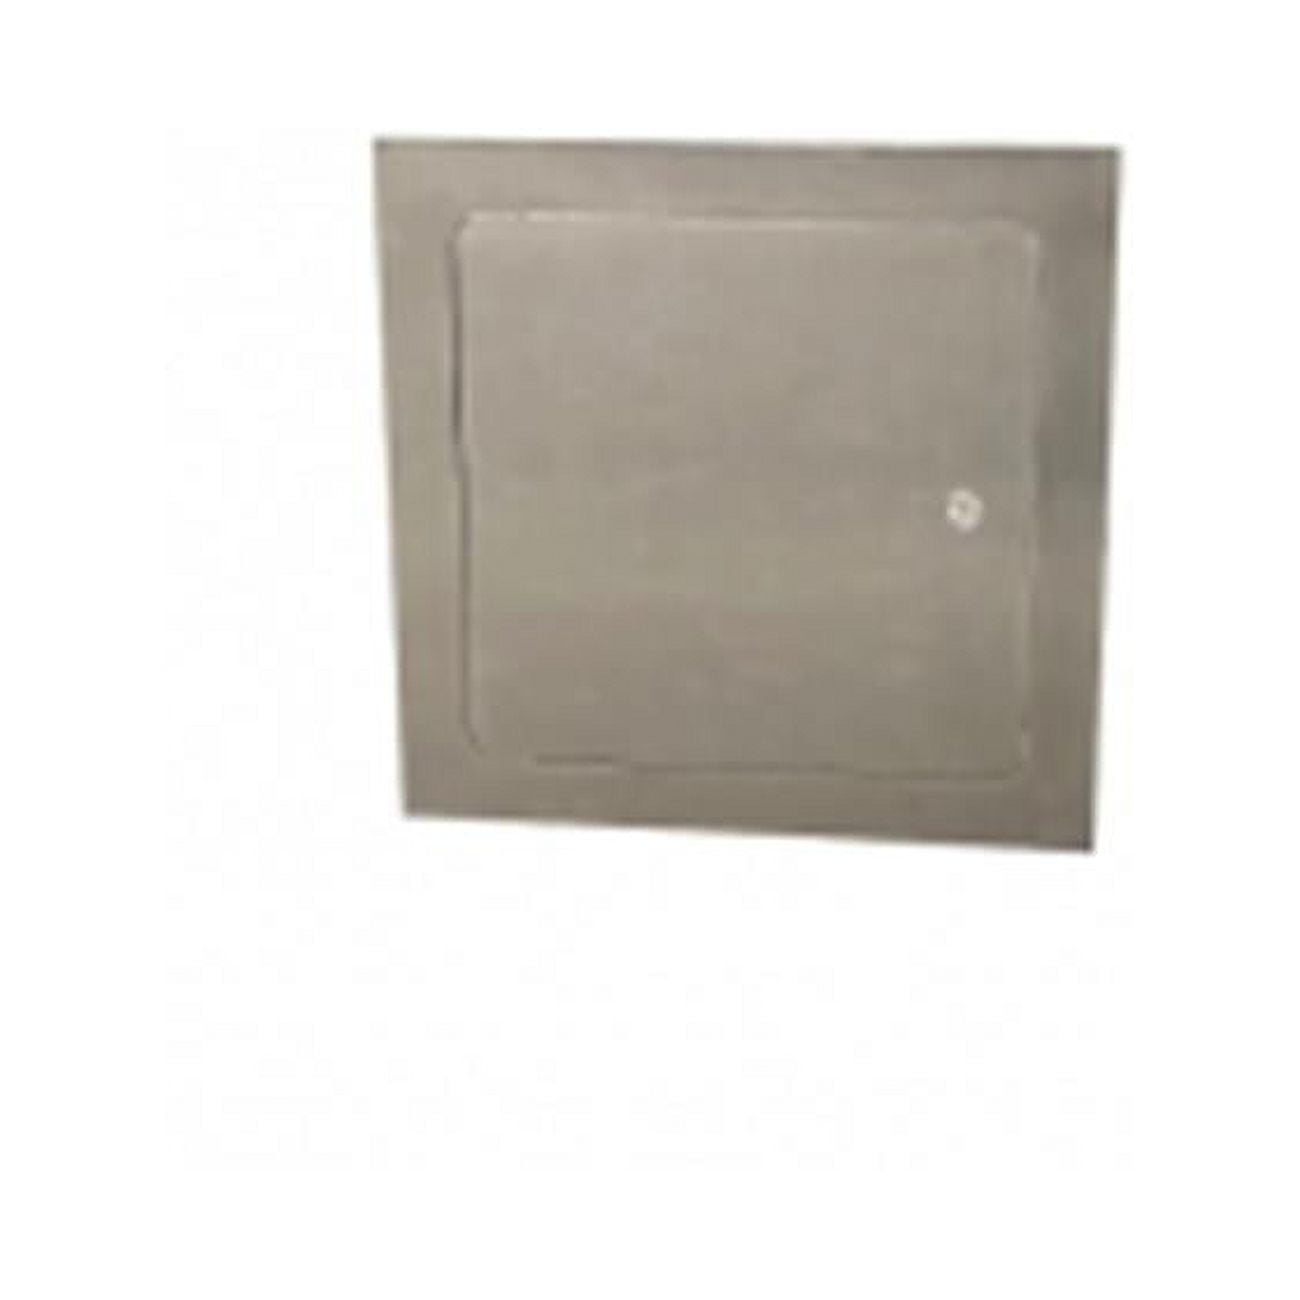 Products 8 X 8 In. Stainless Steel Recessed Access Door